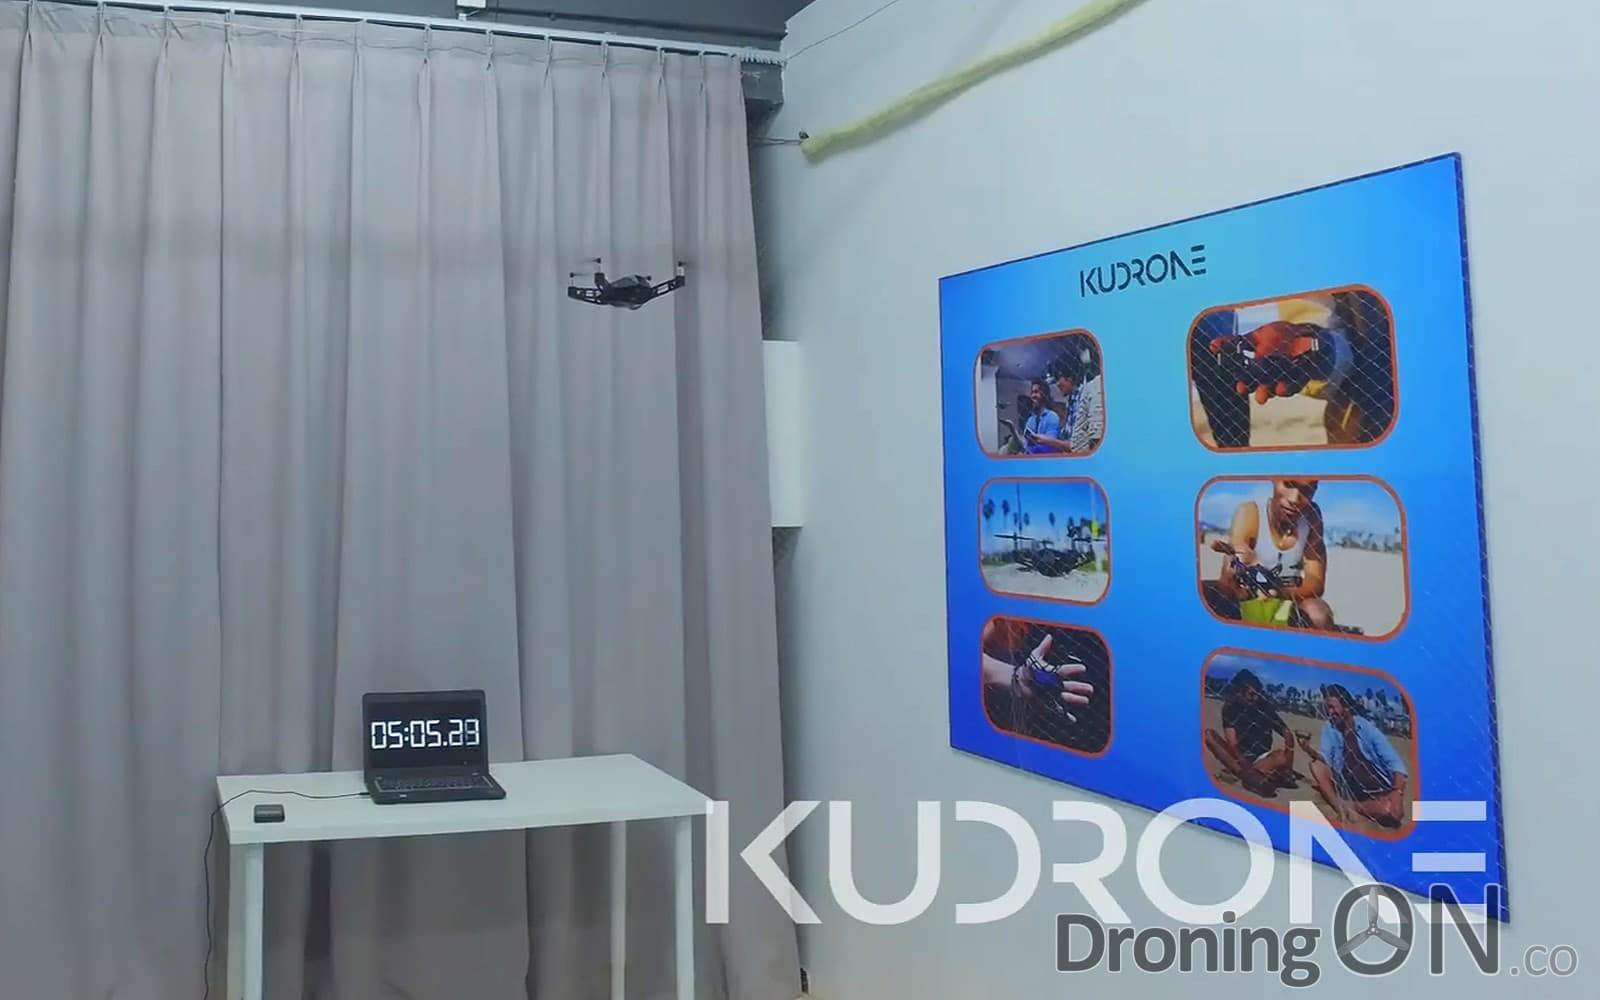 Kudrone Crowdfunder Misleading Backers With Videos - during the campaign false videos were used to advertise/market their product.